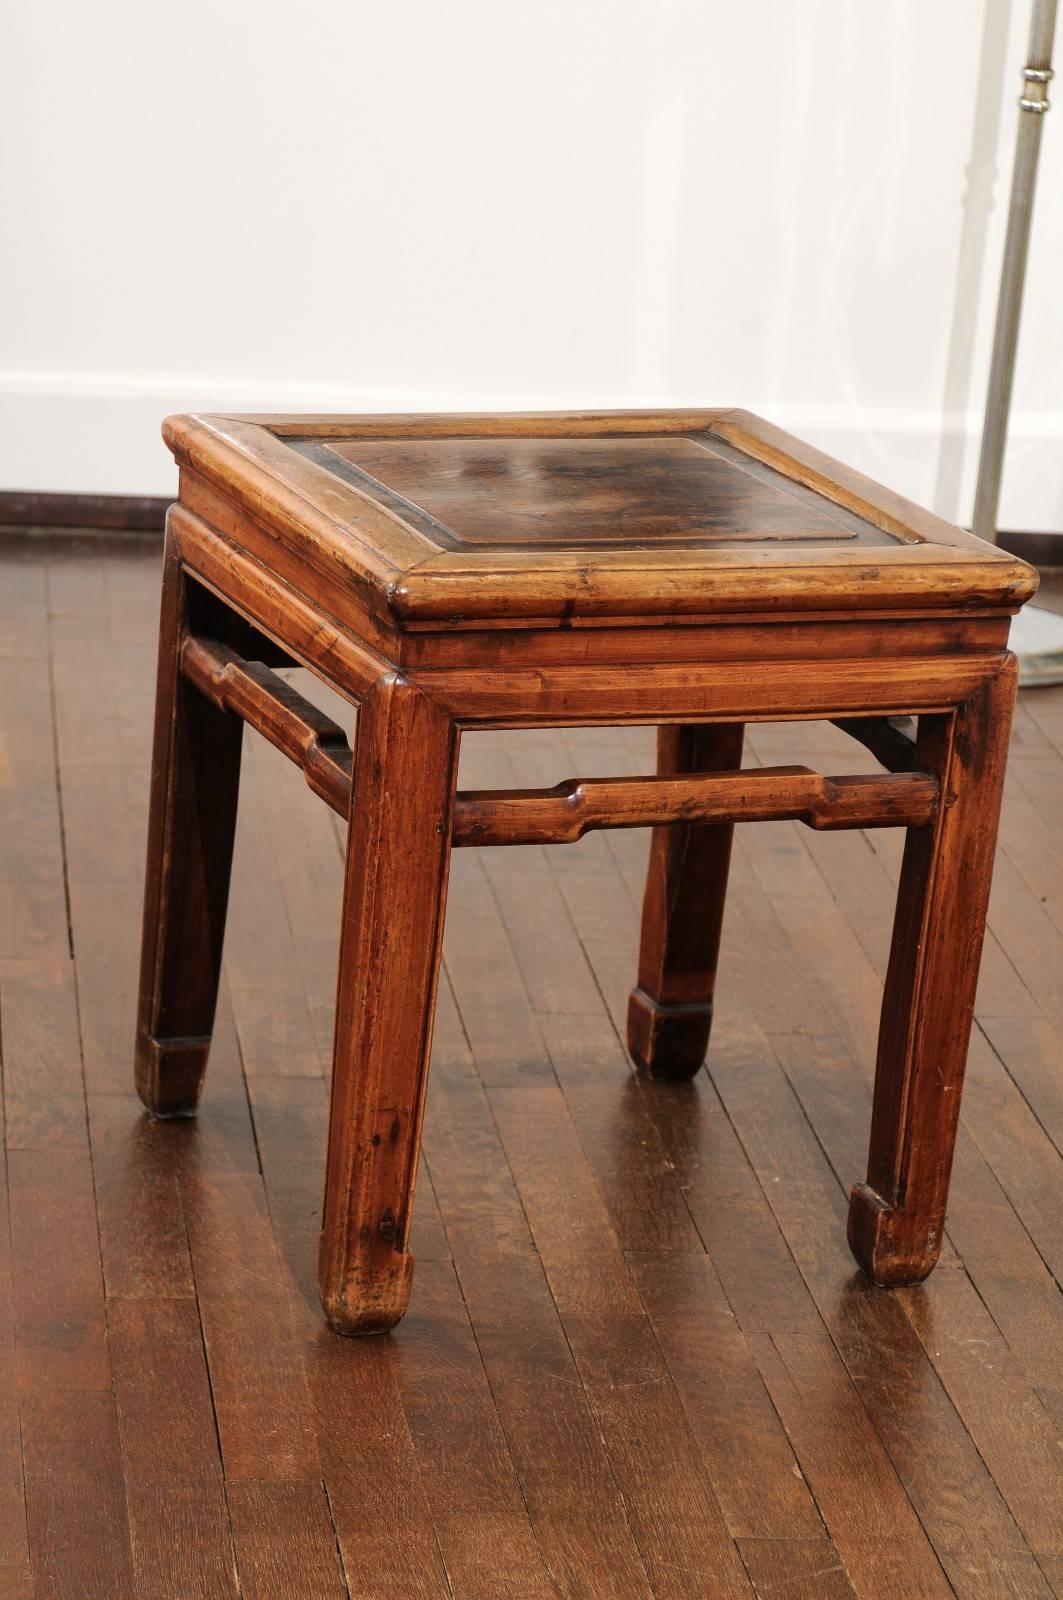 19th century Chinese stool or low table made during the Qing dynasty.